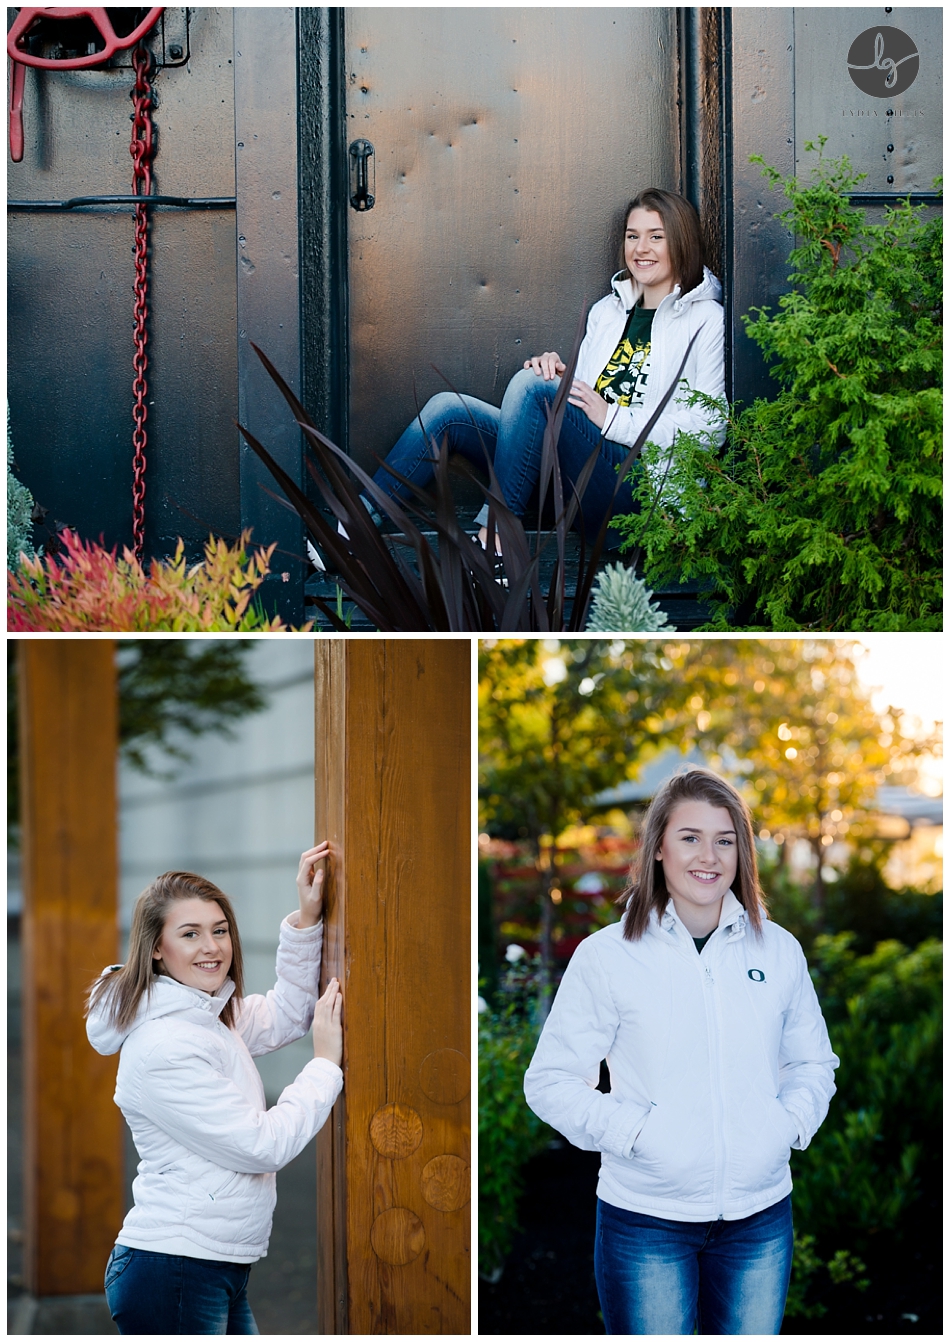 Urban senior pictures in downtown Eugene